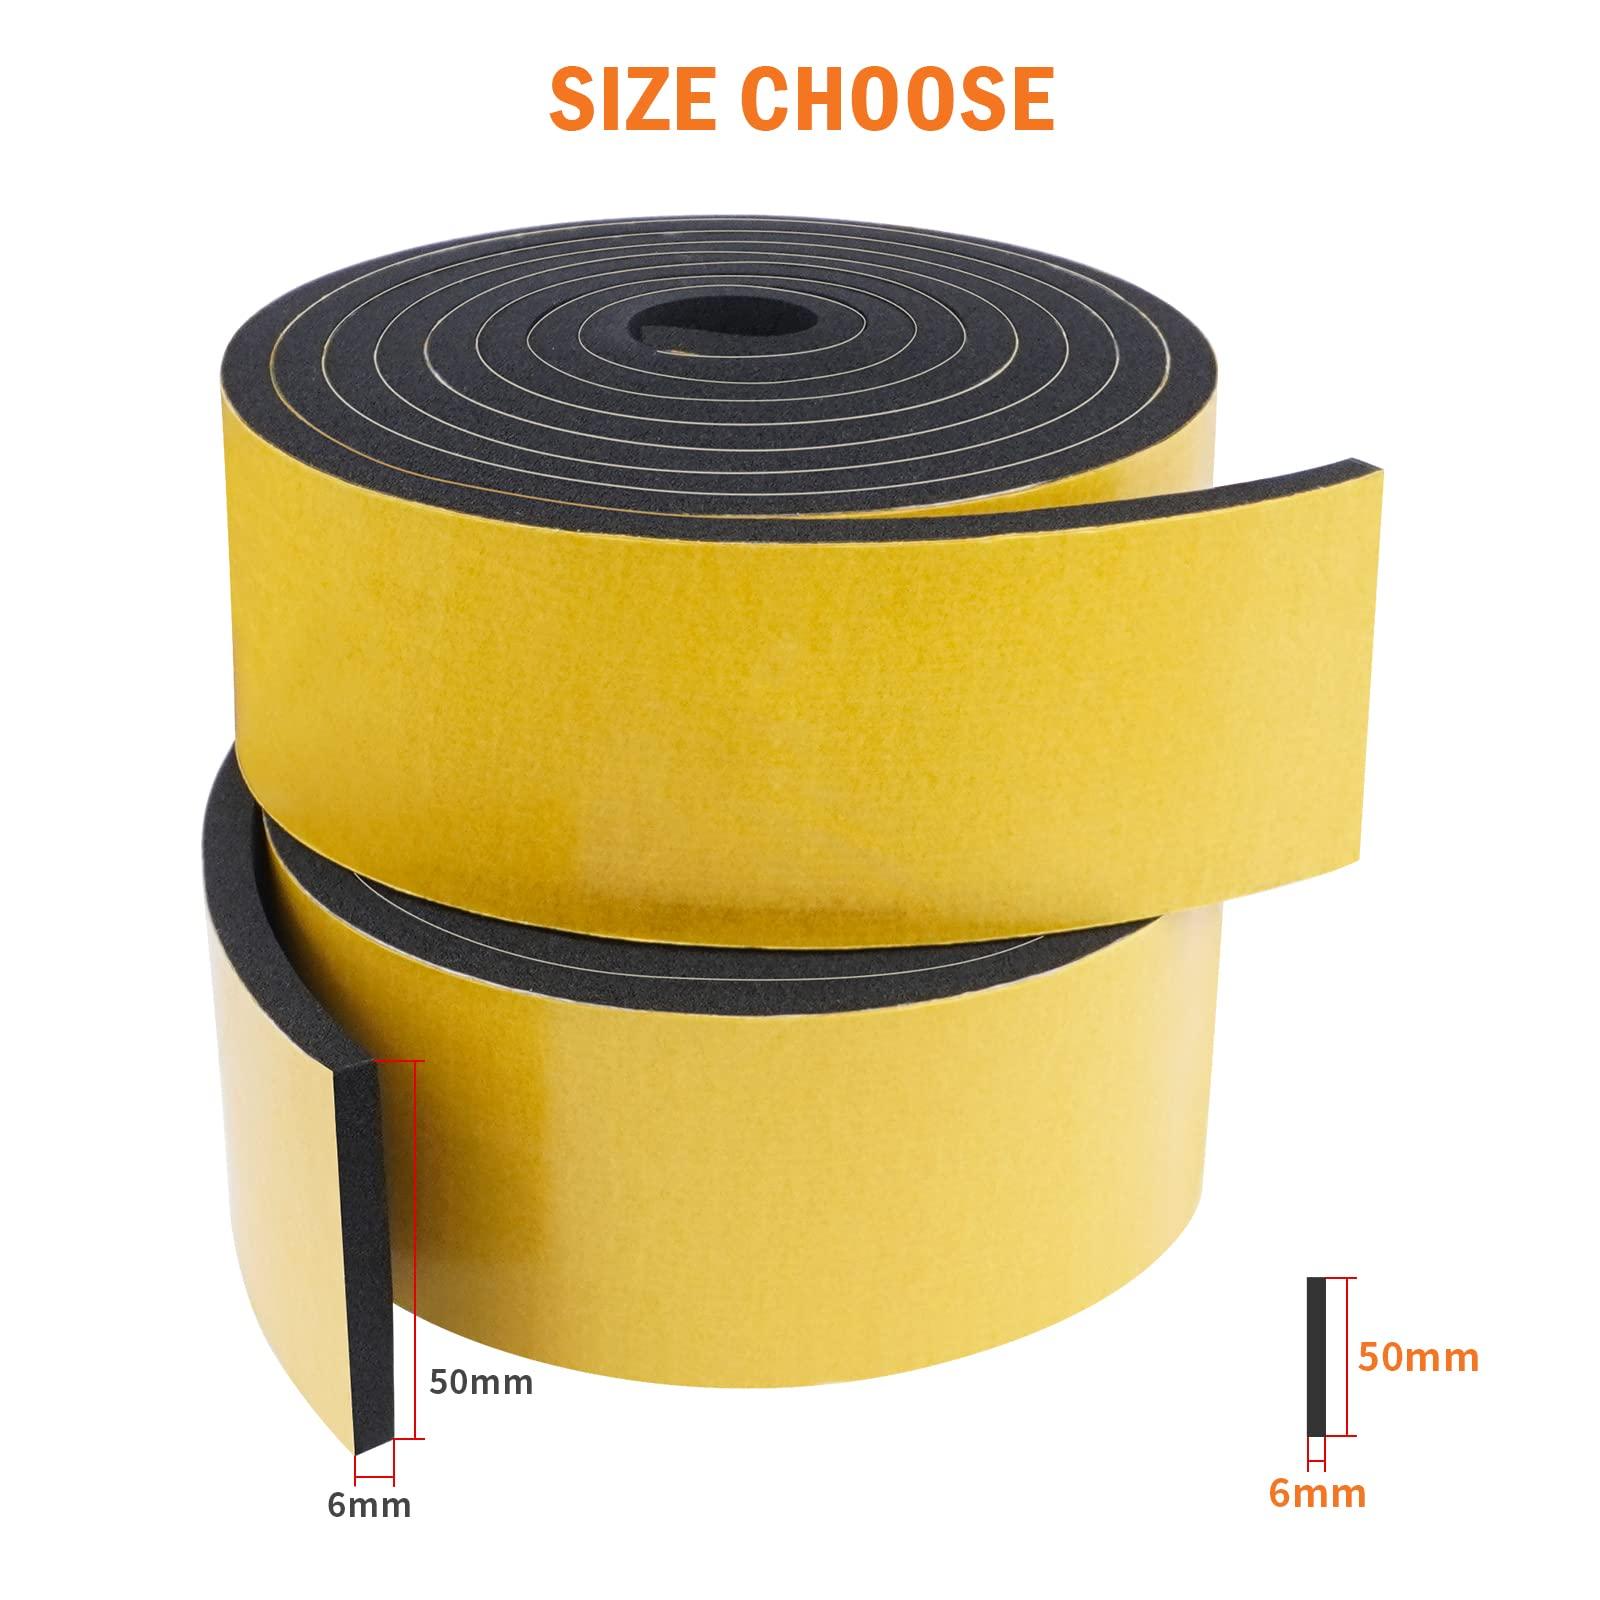 WochiTV High Density Foam Rubber Tape 50mm(W) x 6mm(T), Weatherstrip, Gasket Seal, Anti-Vibration, Anti-Collision, Shockproof, Car, Turck, Air Conditioner, Total 4m (2 Strips, 2M Long Each) 1